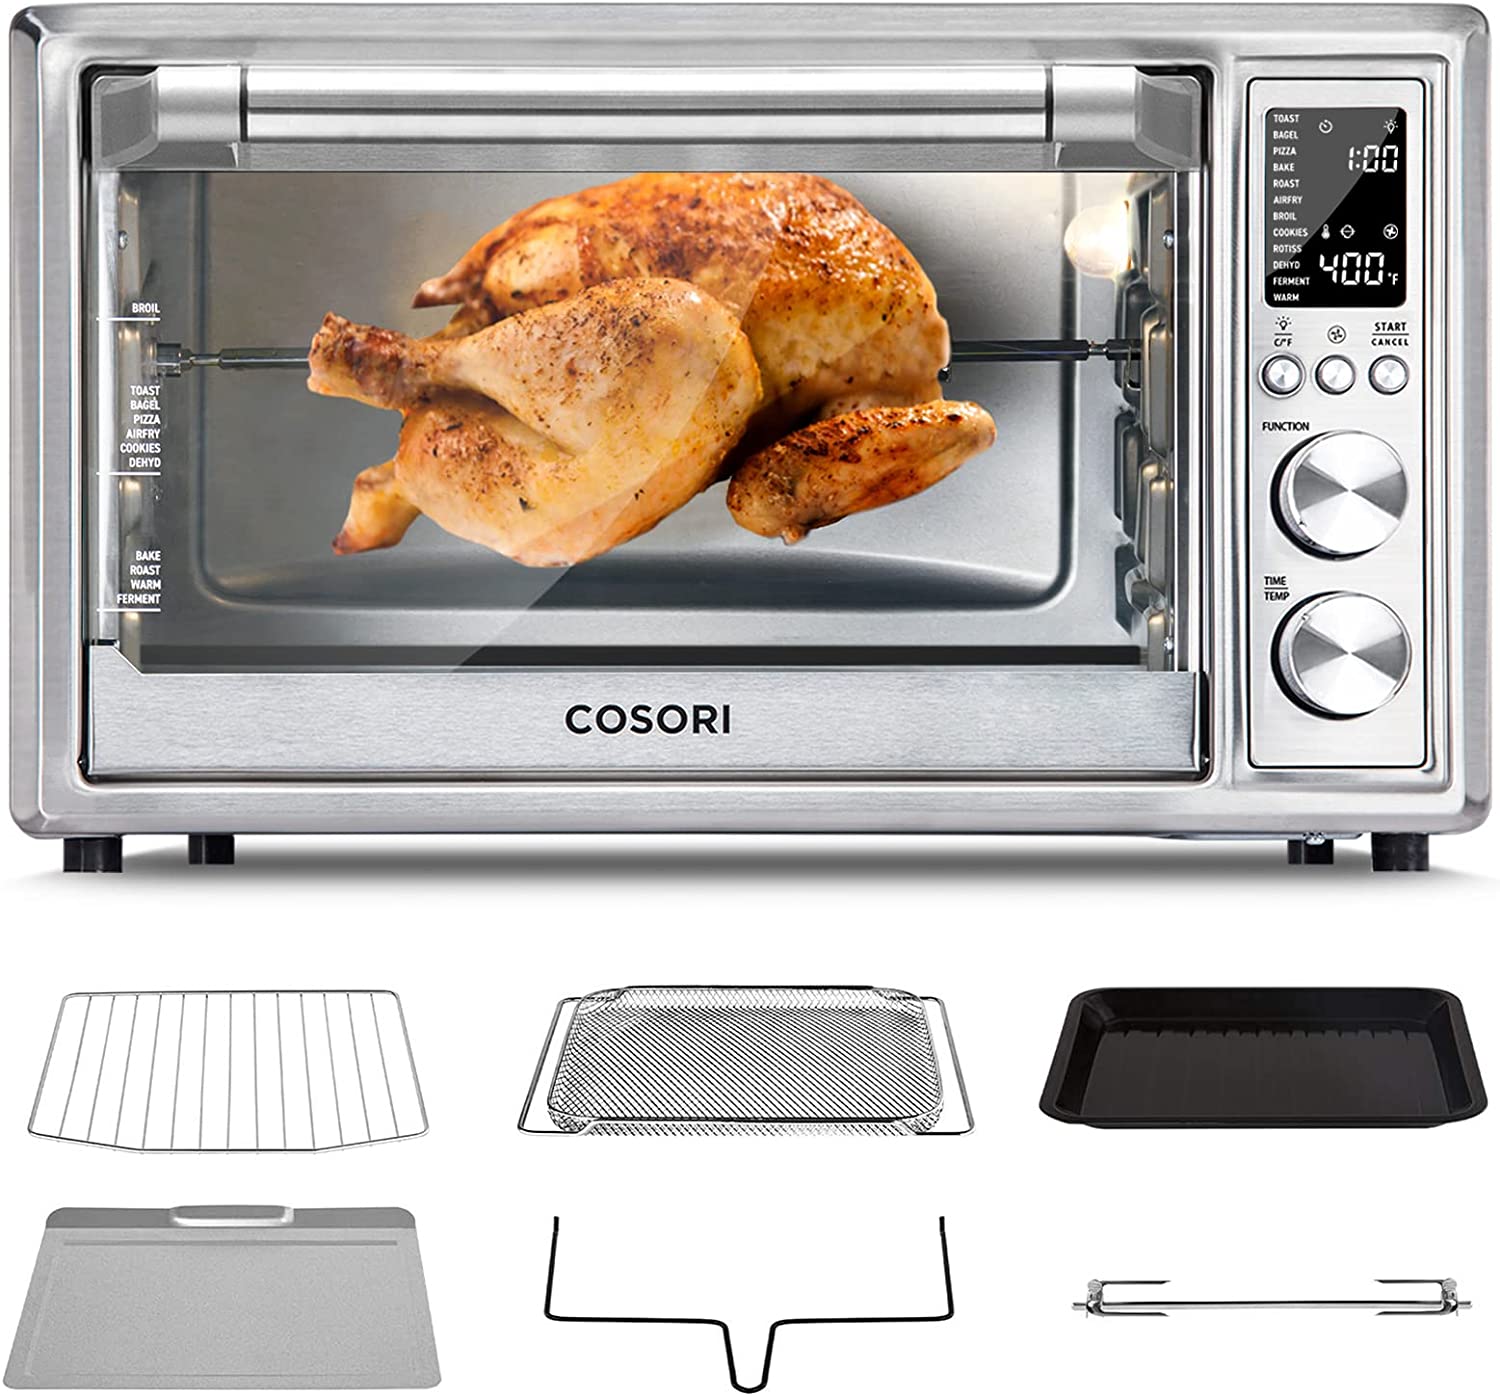 https://bigbigmart.com/wp-content/uploads/2023/06/COSORI-Air-Fryer-Toaster-Oven-12-in-1-Convection-Oven-Countertop-with-Rotisserie-Stainless-Steel-32QT-32L-6-Slice-Toast-13-inch-Pizza100-Recipes-Basket-Tray6-AccessoriesIncluded-CO130-AO.jpg